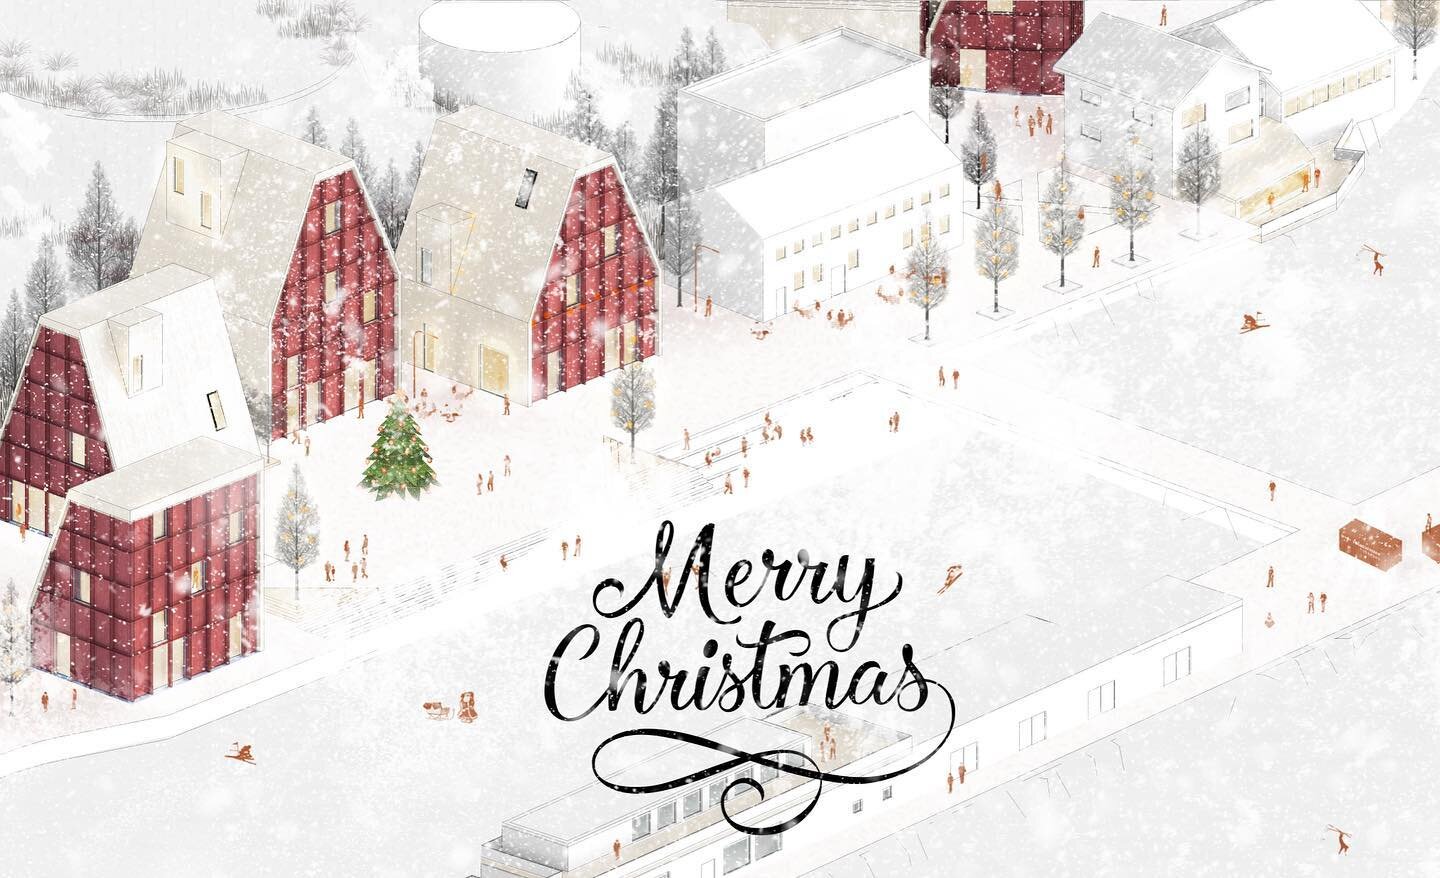 All the best wishes and holiday greetings from TIENO Architects!
#tienoarkkitehdit #xmas #holidaygreetings
.
.
.
#architecture #archdaily #scandinavianchristmas #europan #archvisuals #archvis #holzbau #timberarchitecture